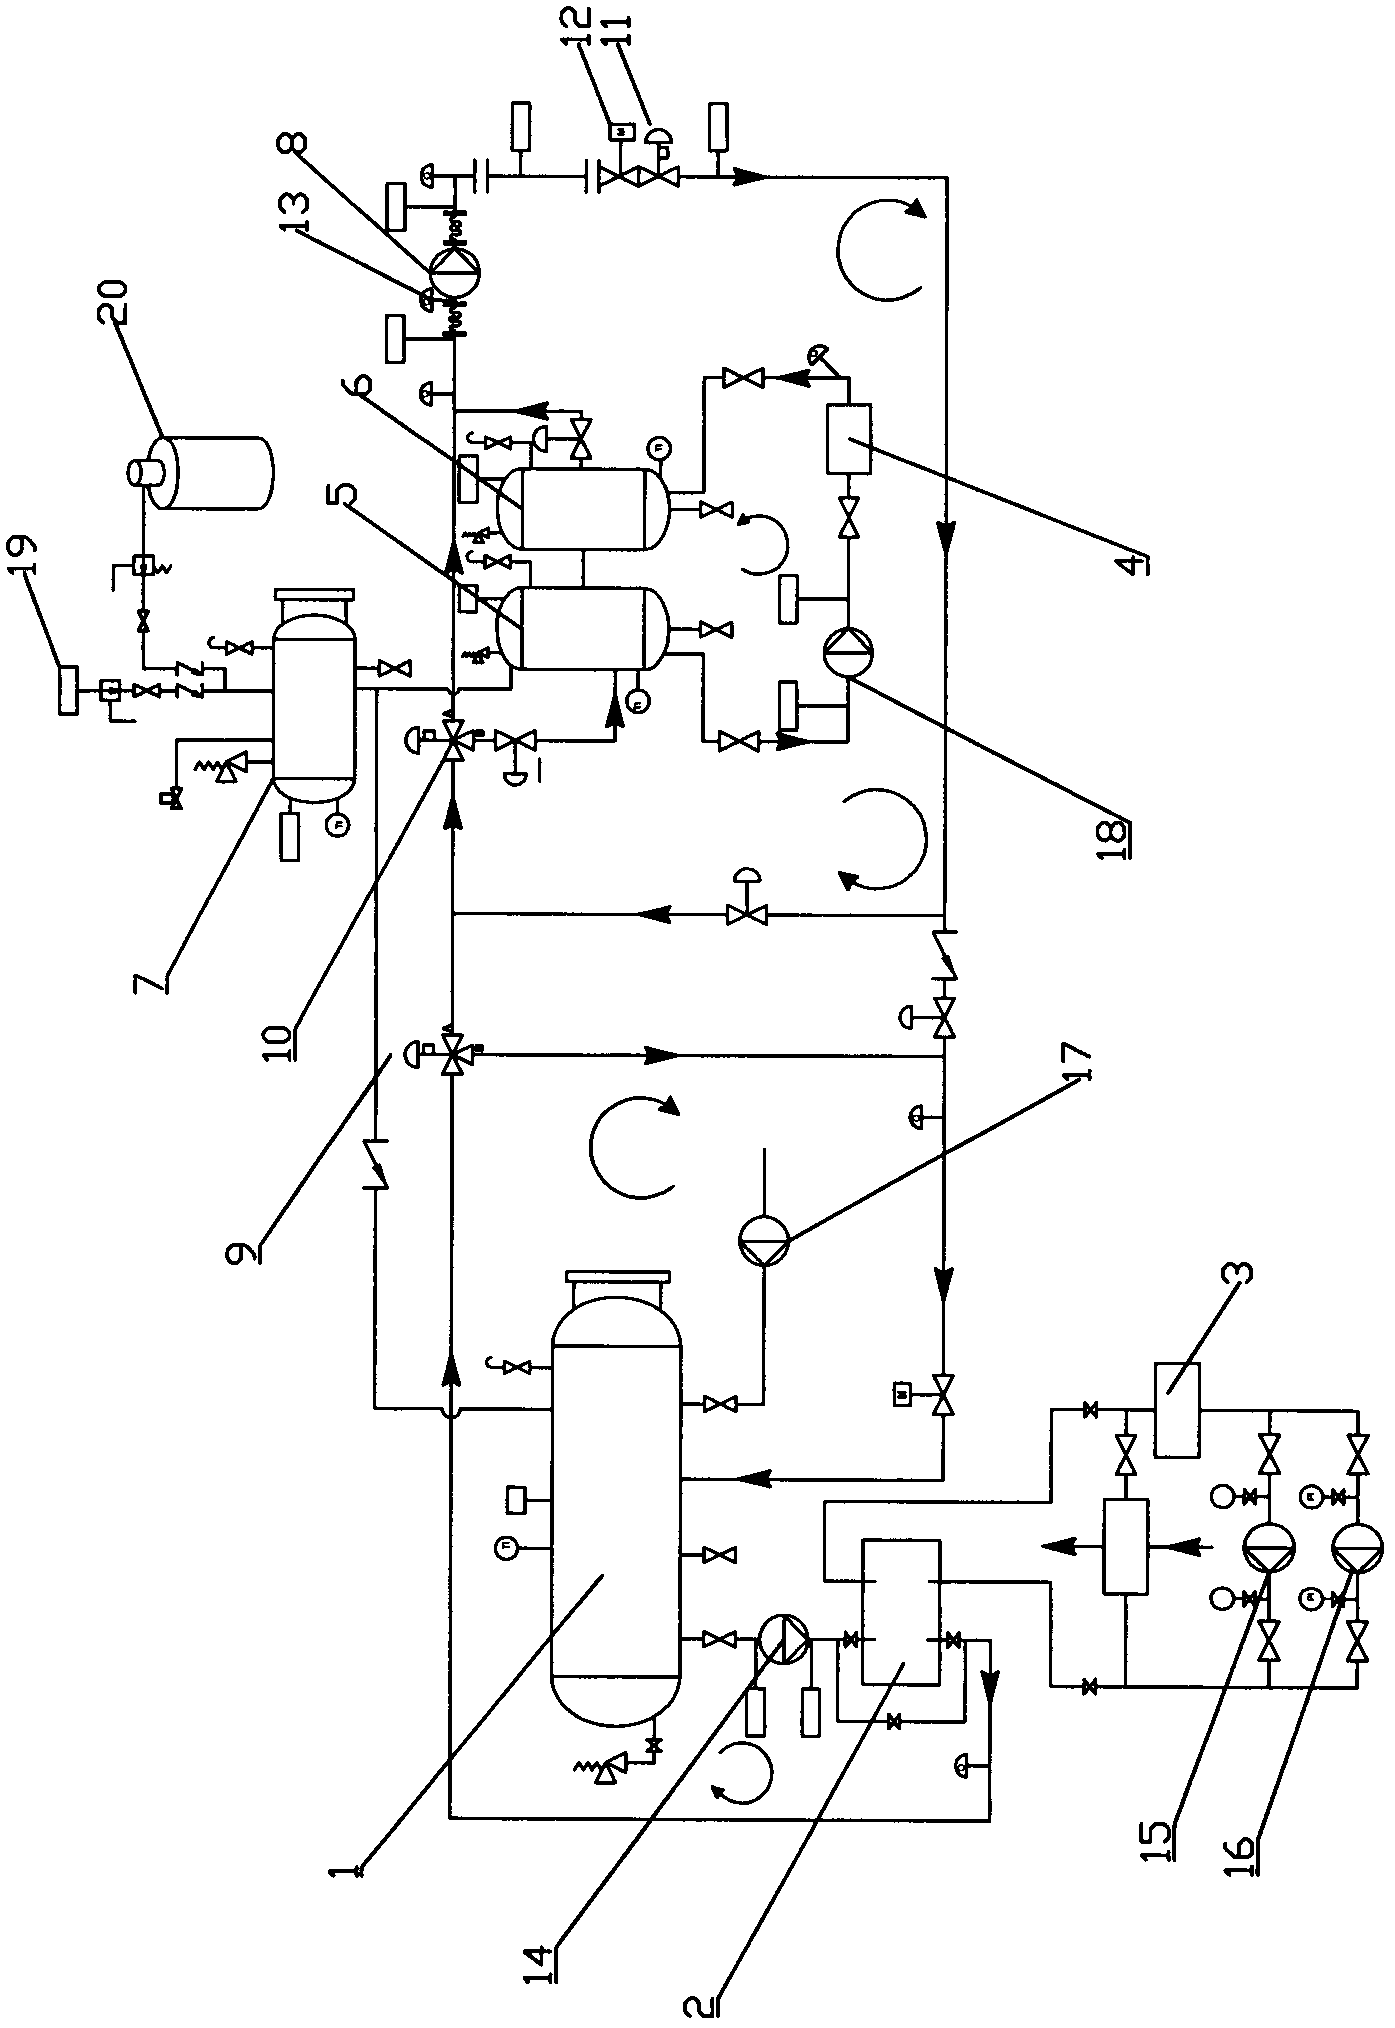 Thermal shock testing method and system for pump